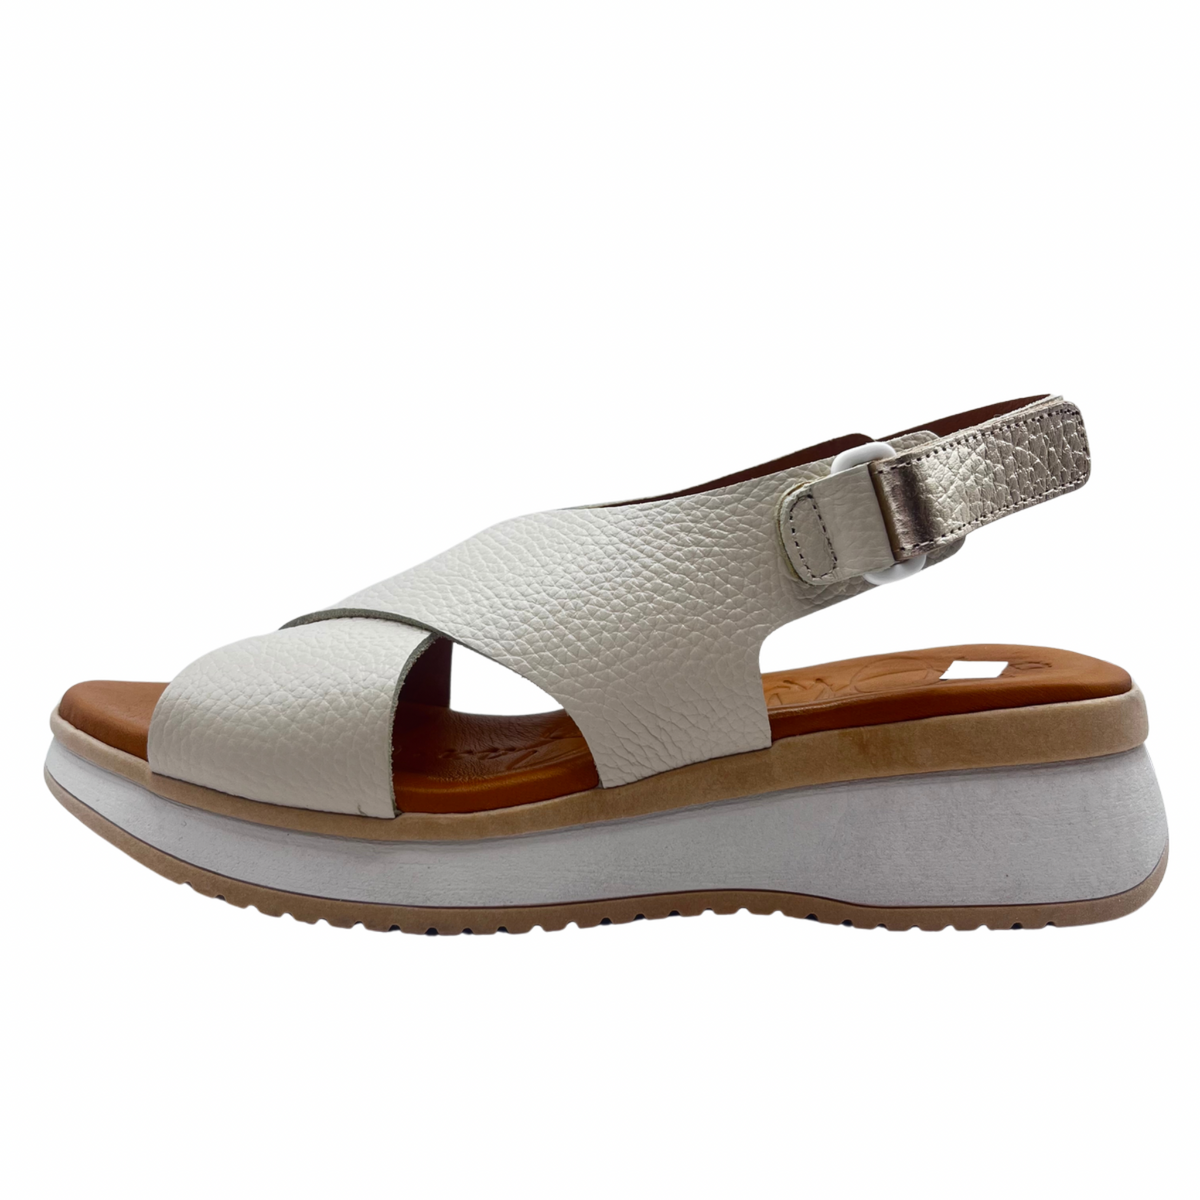 Oh My Sandals Cream Cross Over Wedge Leather Sandal